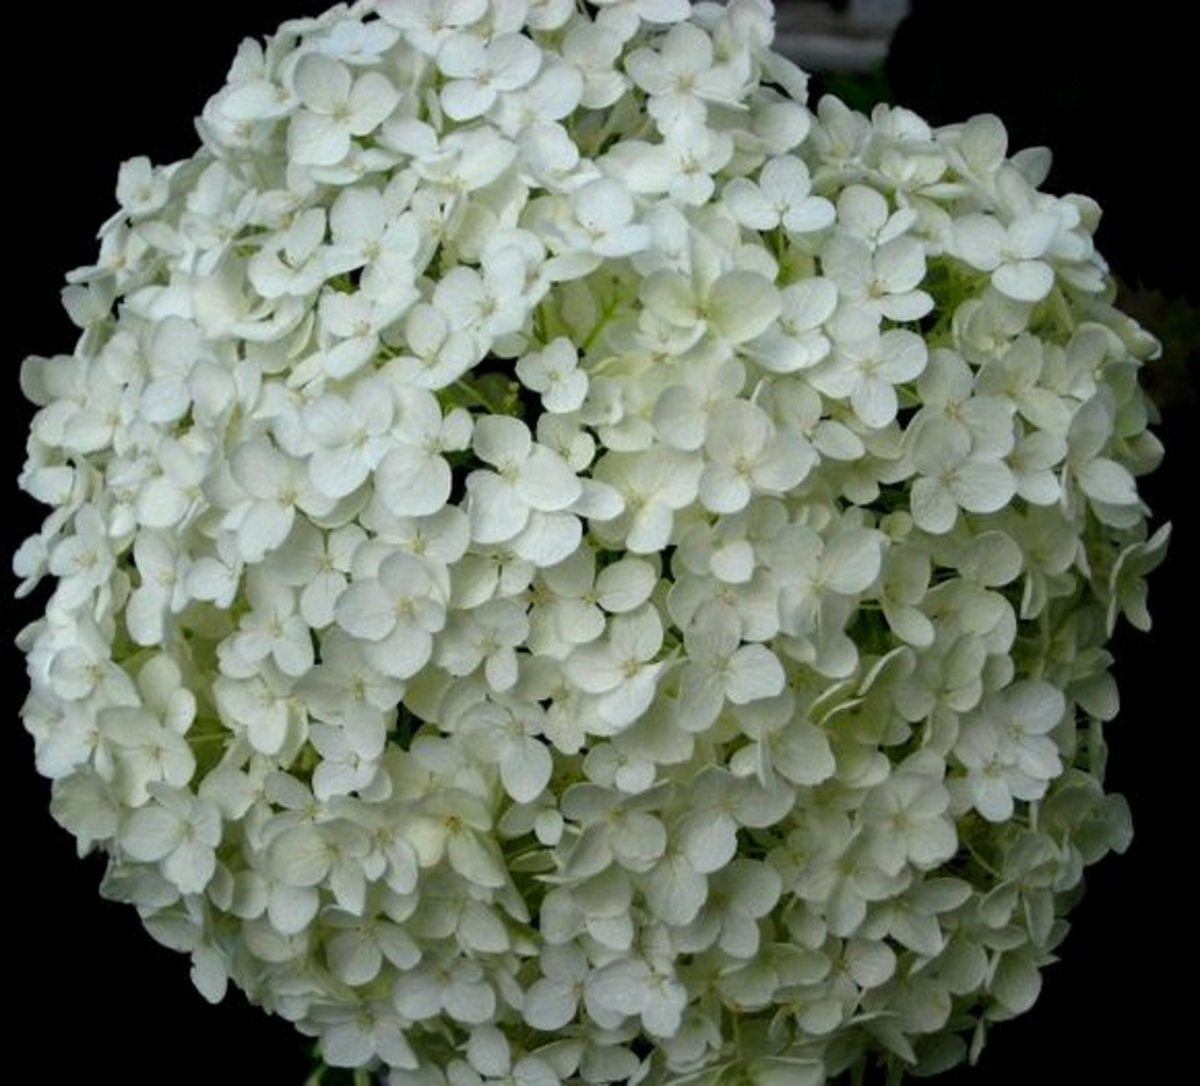 Garden plants with white flowers